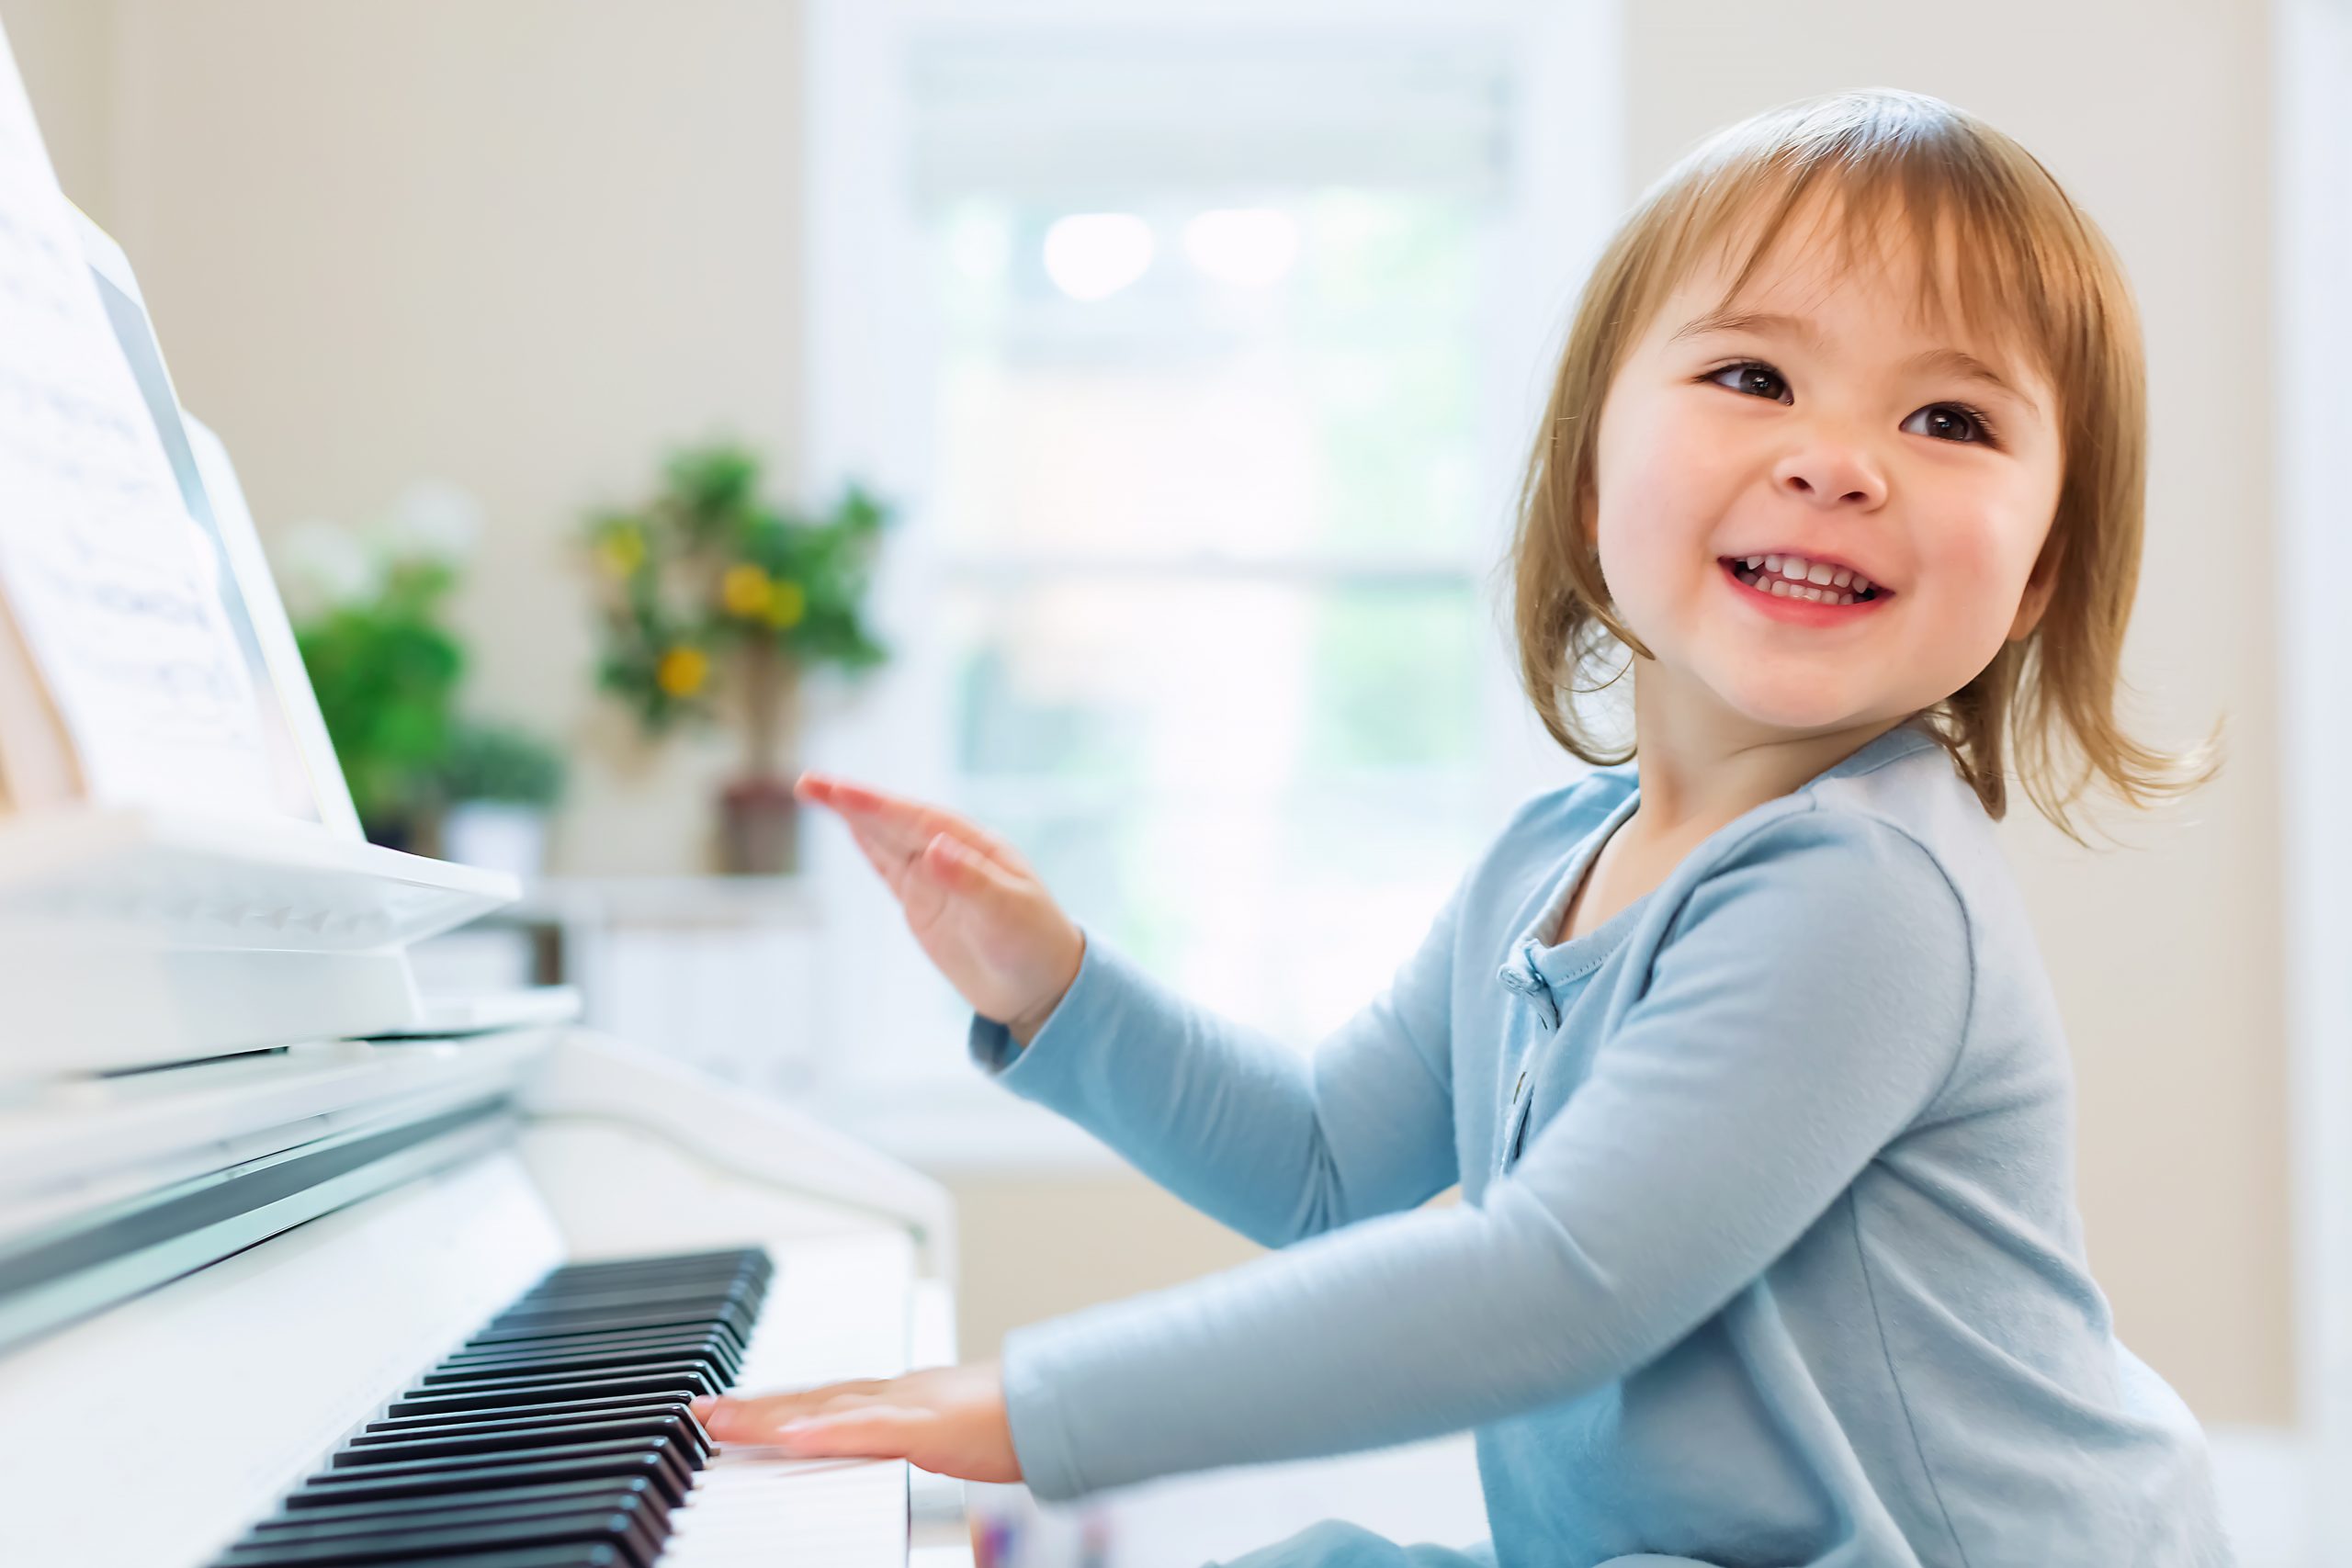 Happy smiling toddler girl excited to play the piano